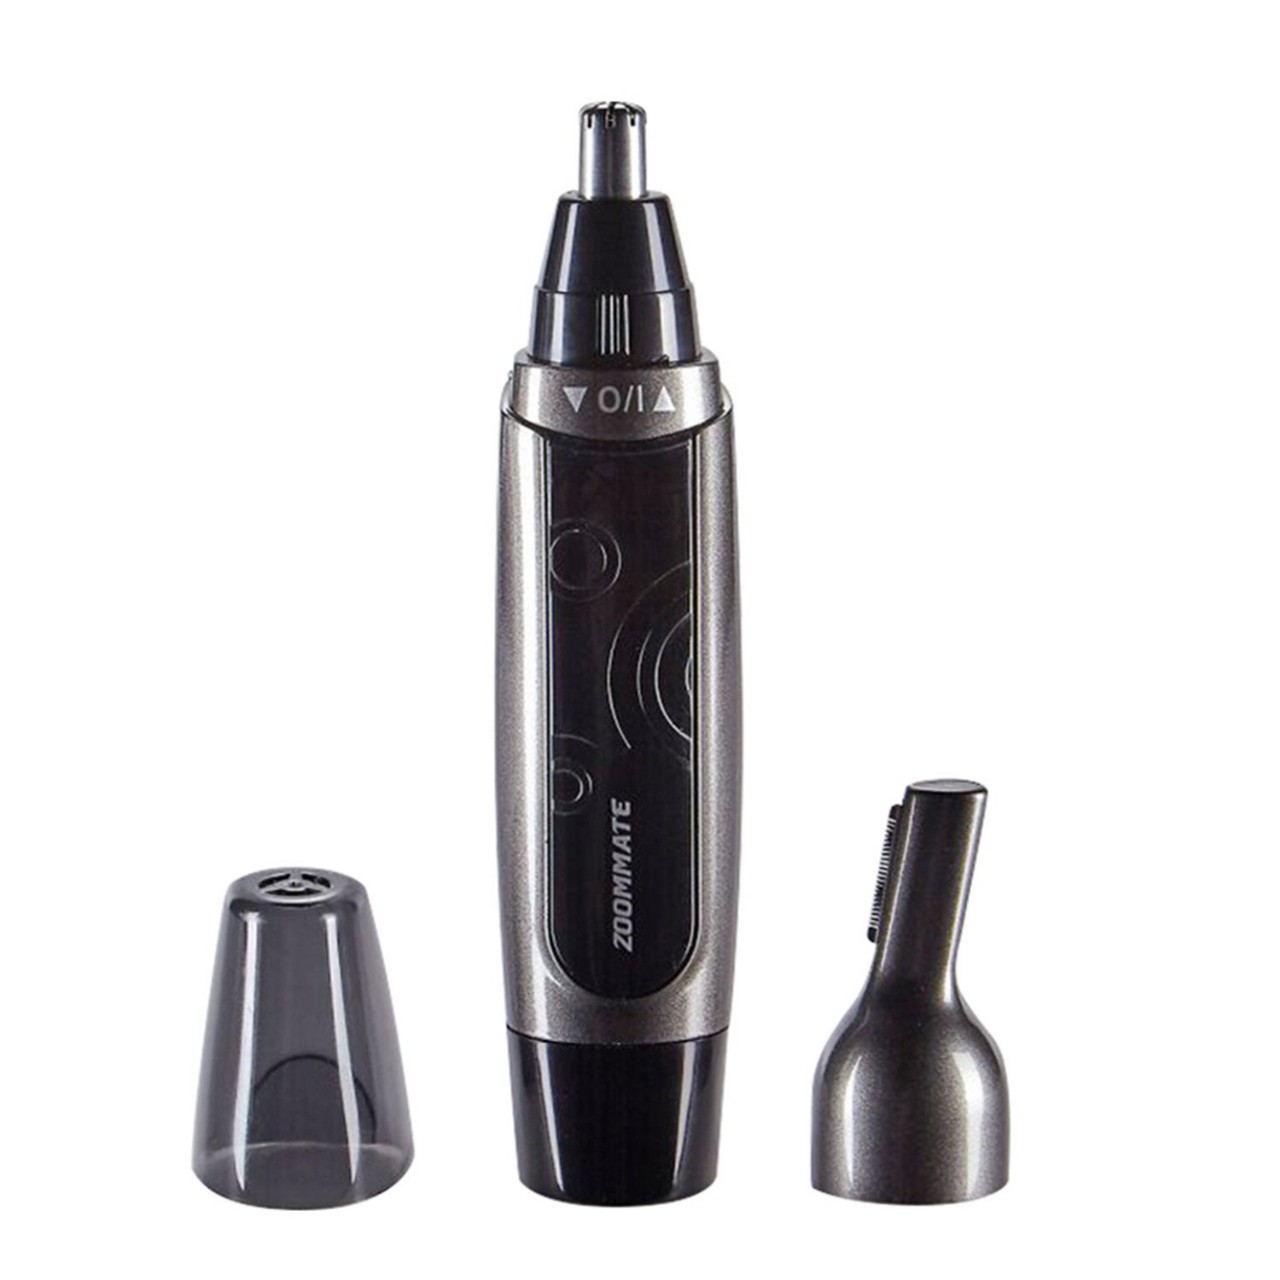 Professional Nose Hair Trimmer, ZOOMMATE Powerful Waterproof Nose Ear Hair Trimmer for Men, Wet/Dry